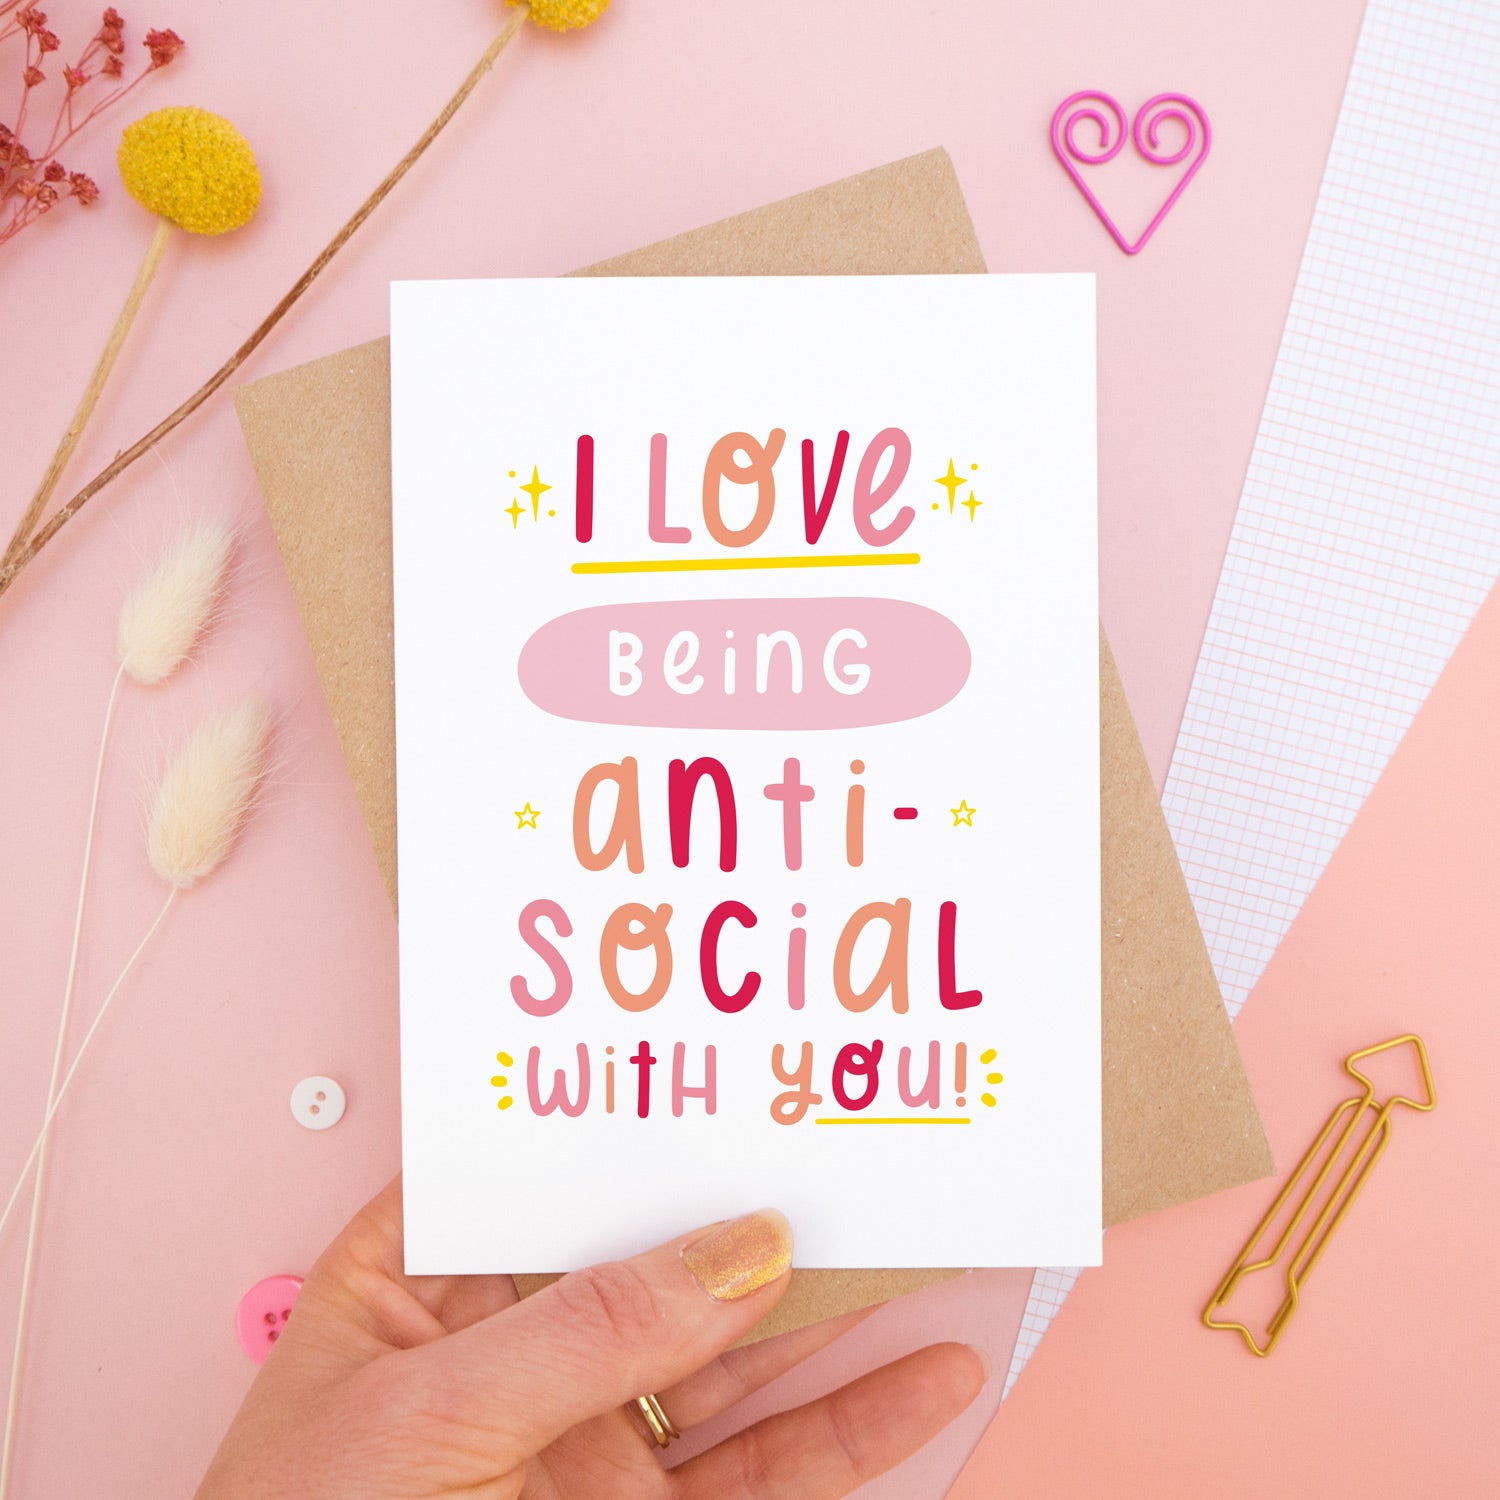 The 'I love being anti-social with you' card photographed on a pink background with dried flowers, buttons and paper clips as props. The card itself is being held above the scene.